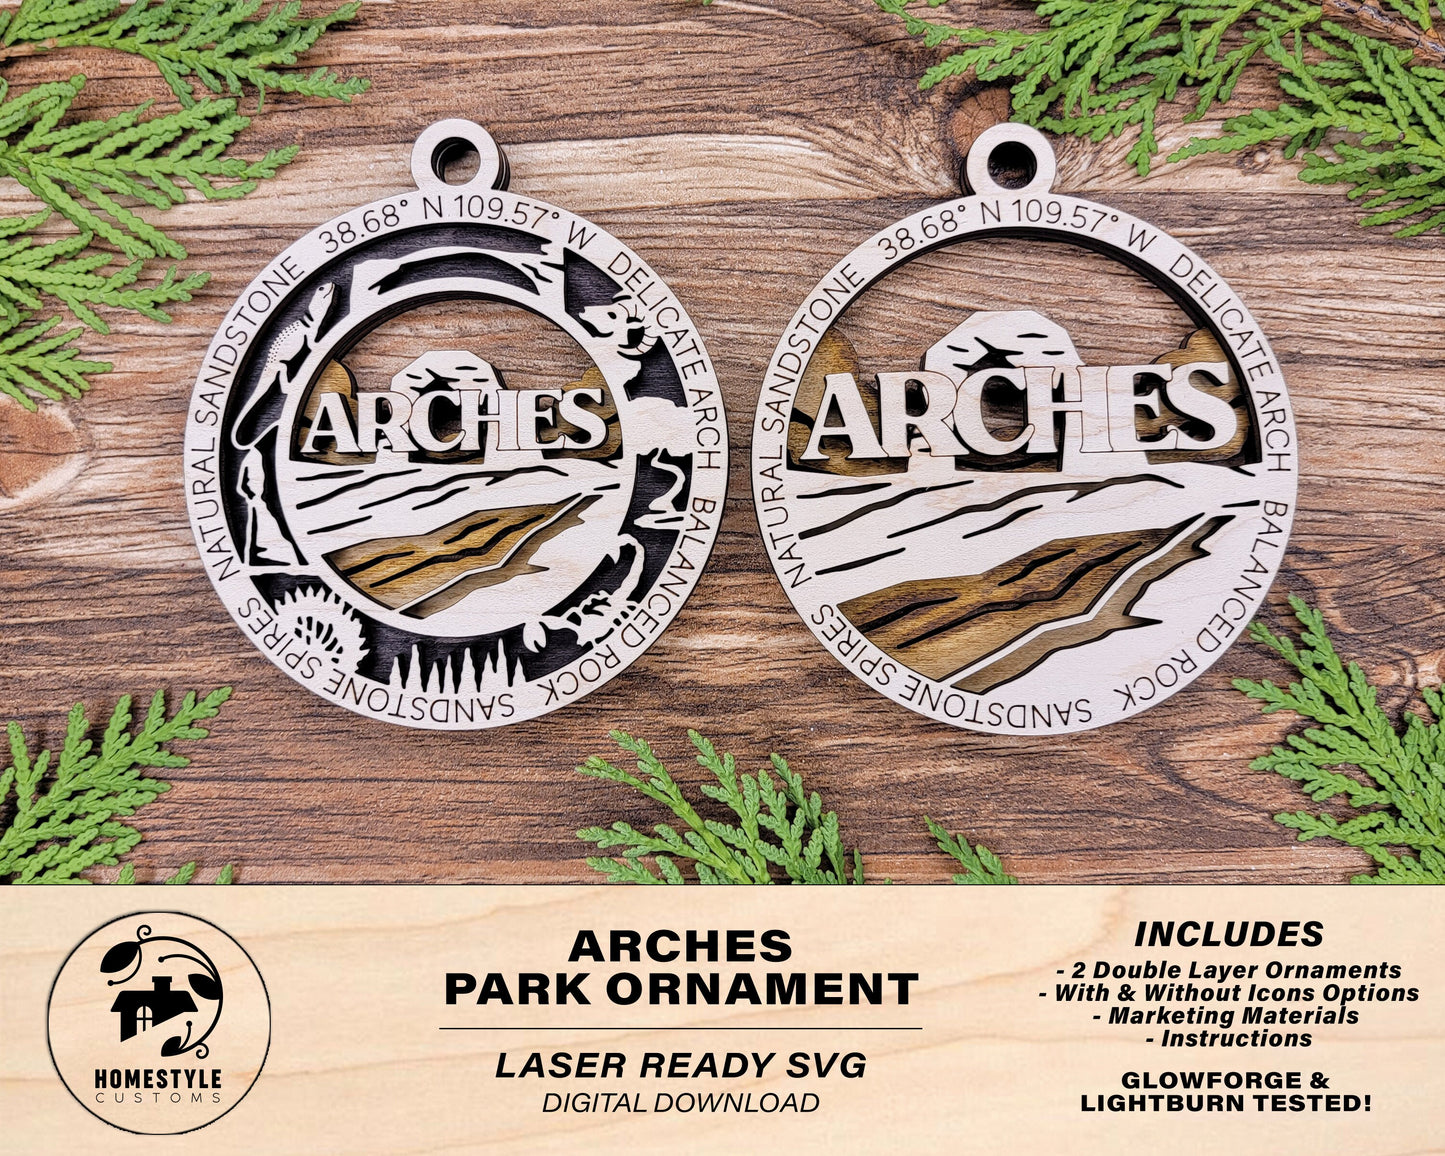 Arches Park Ornament - Includes 2 Ornaments - Laser Design SVG, PDF, AI File Download - Tested On Glowforge and LightBurn